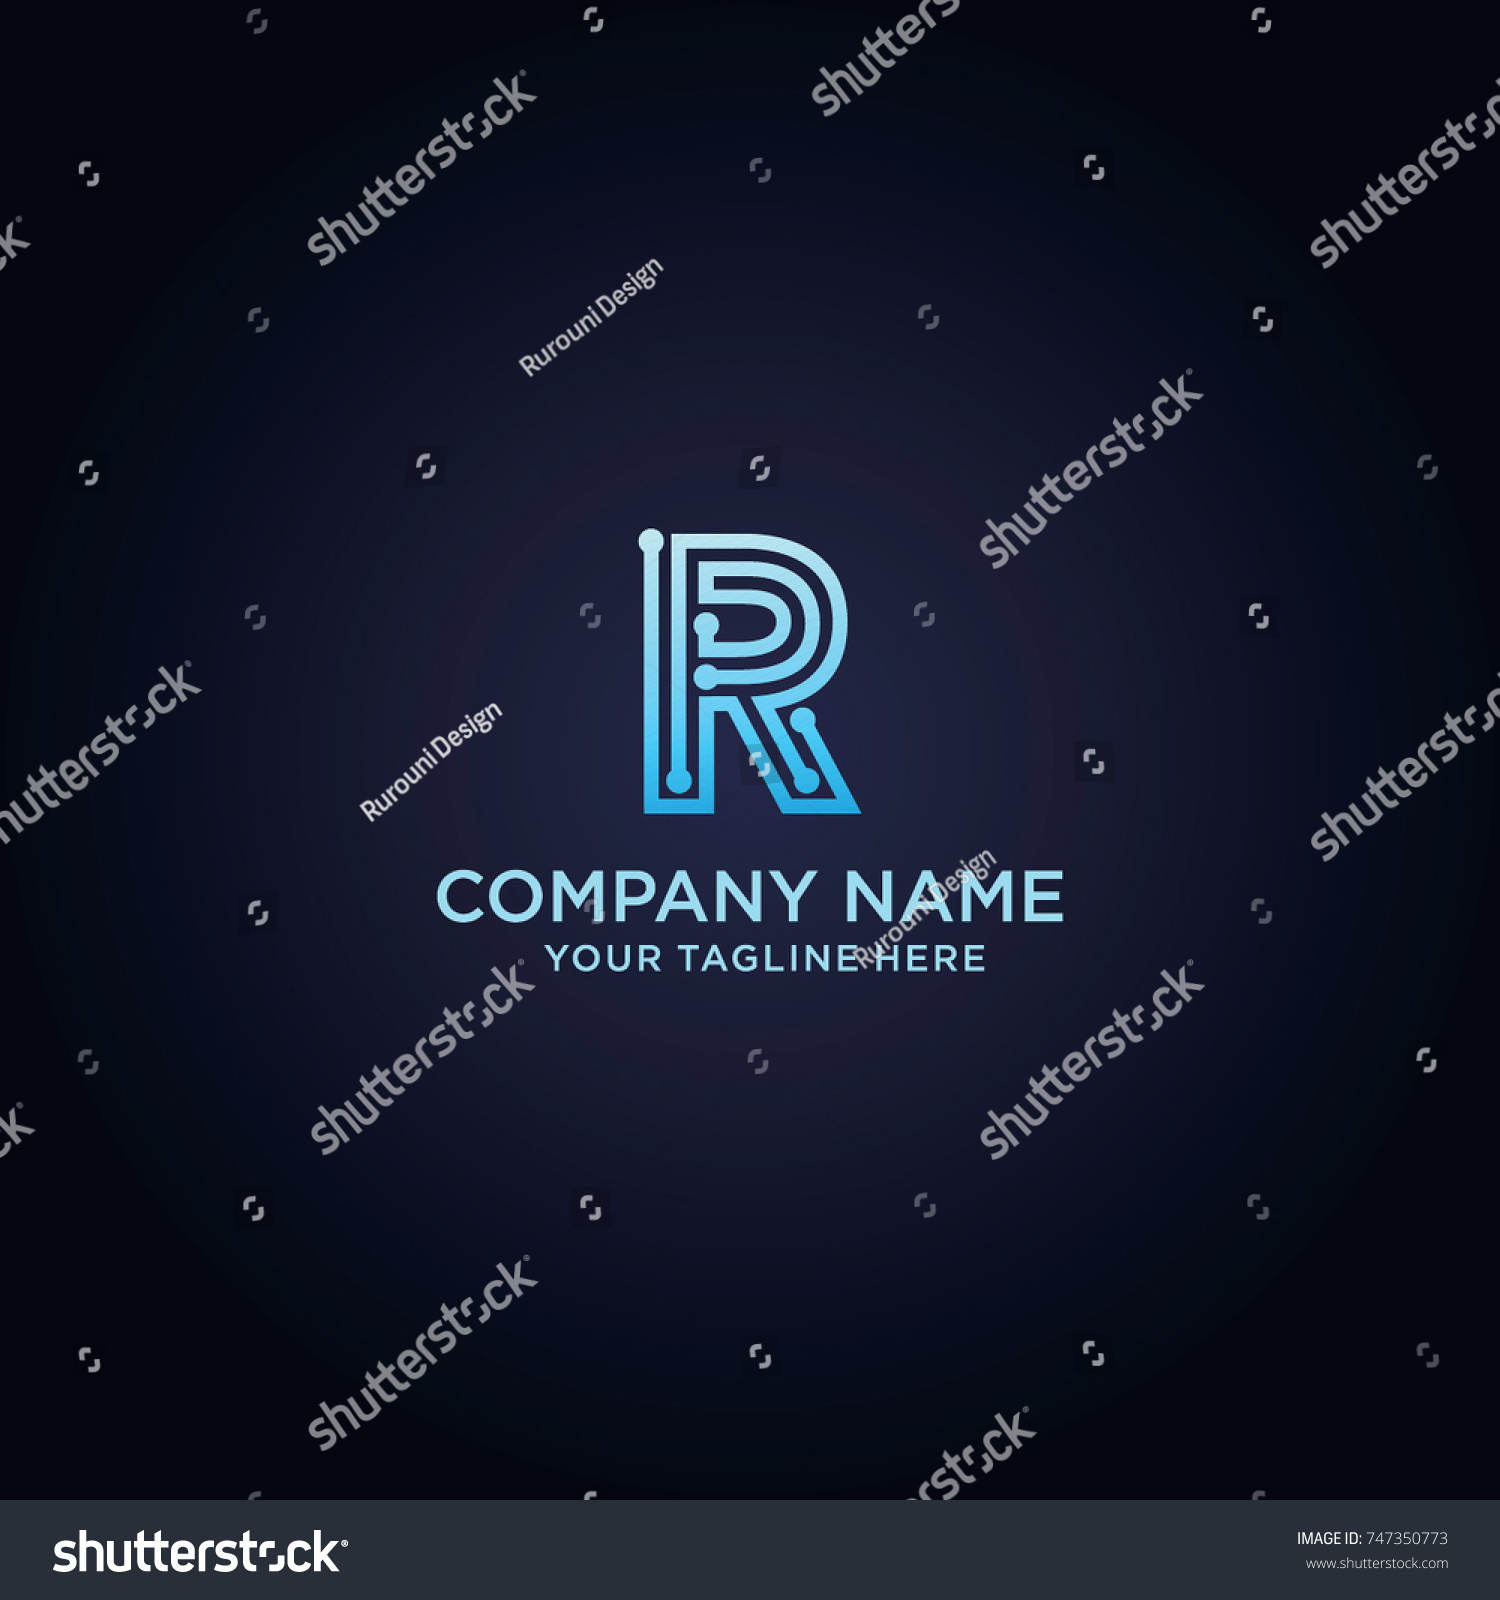 letter-r-logo-design-template-technology-and-royalty-free-stock